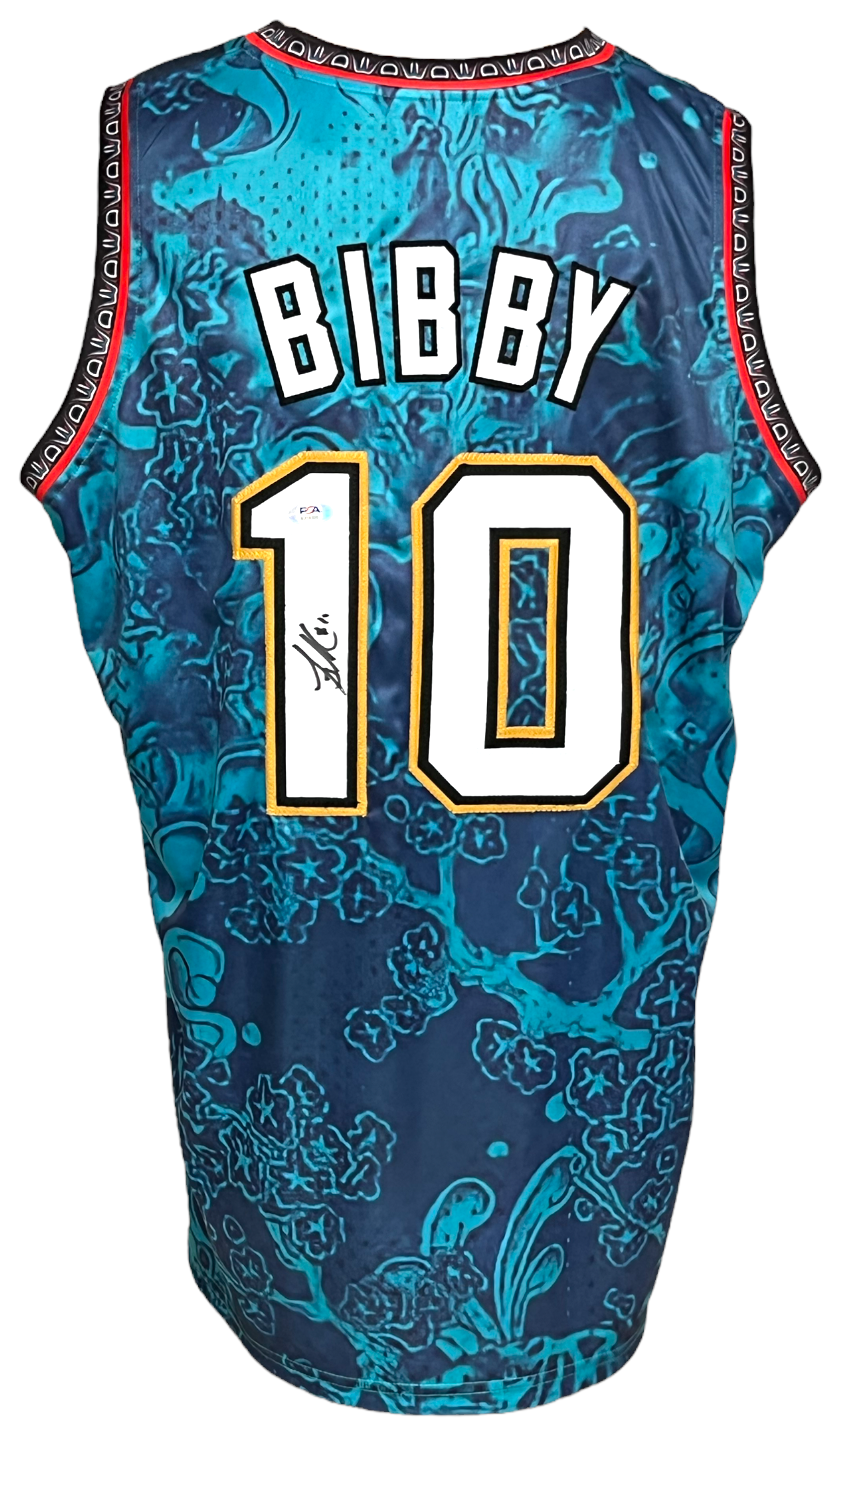 Mike Bibby Throwback Vancouver Grizzlies Jersey | Sticker